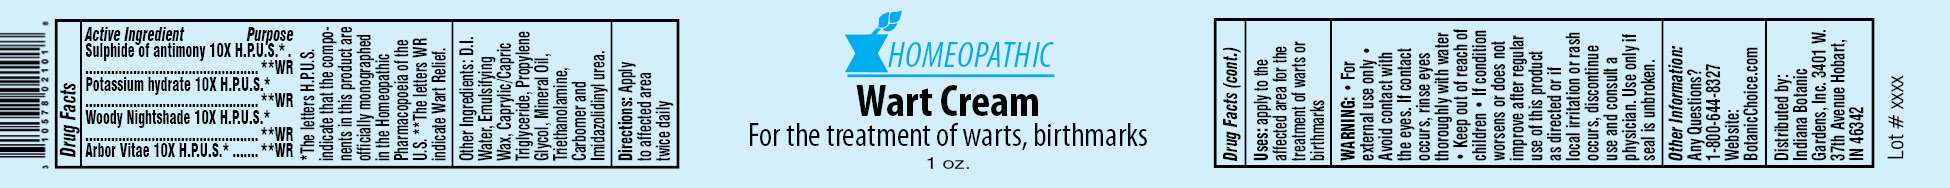 Homeopathic Wart